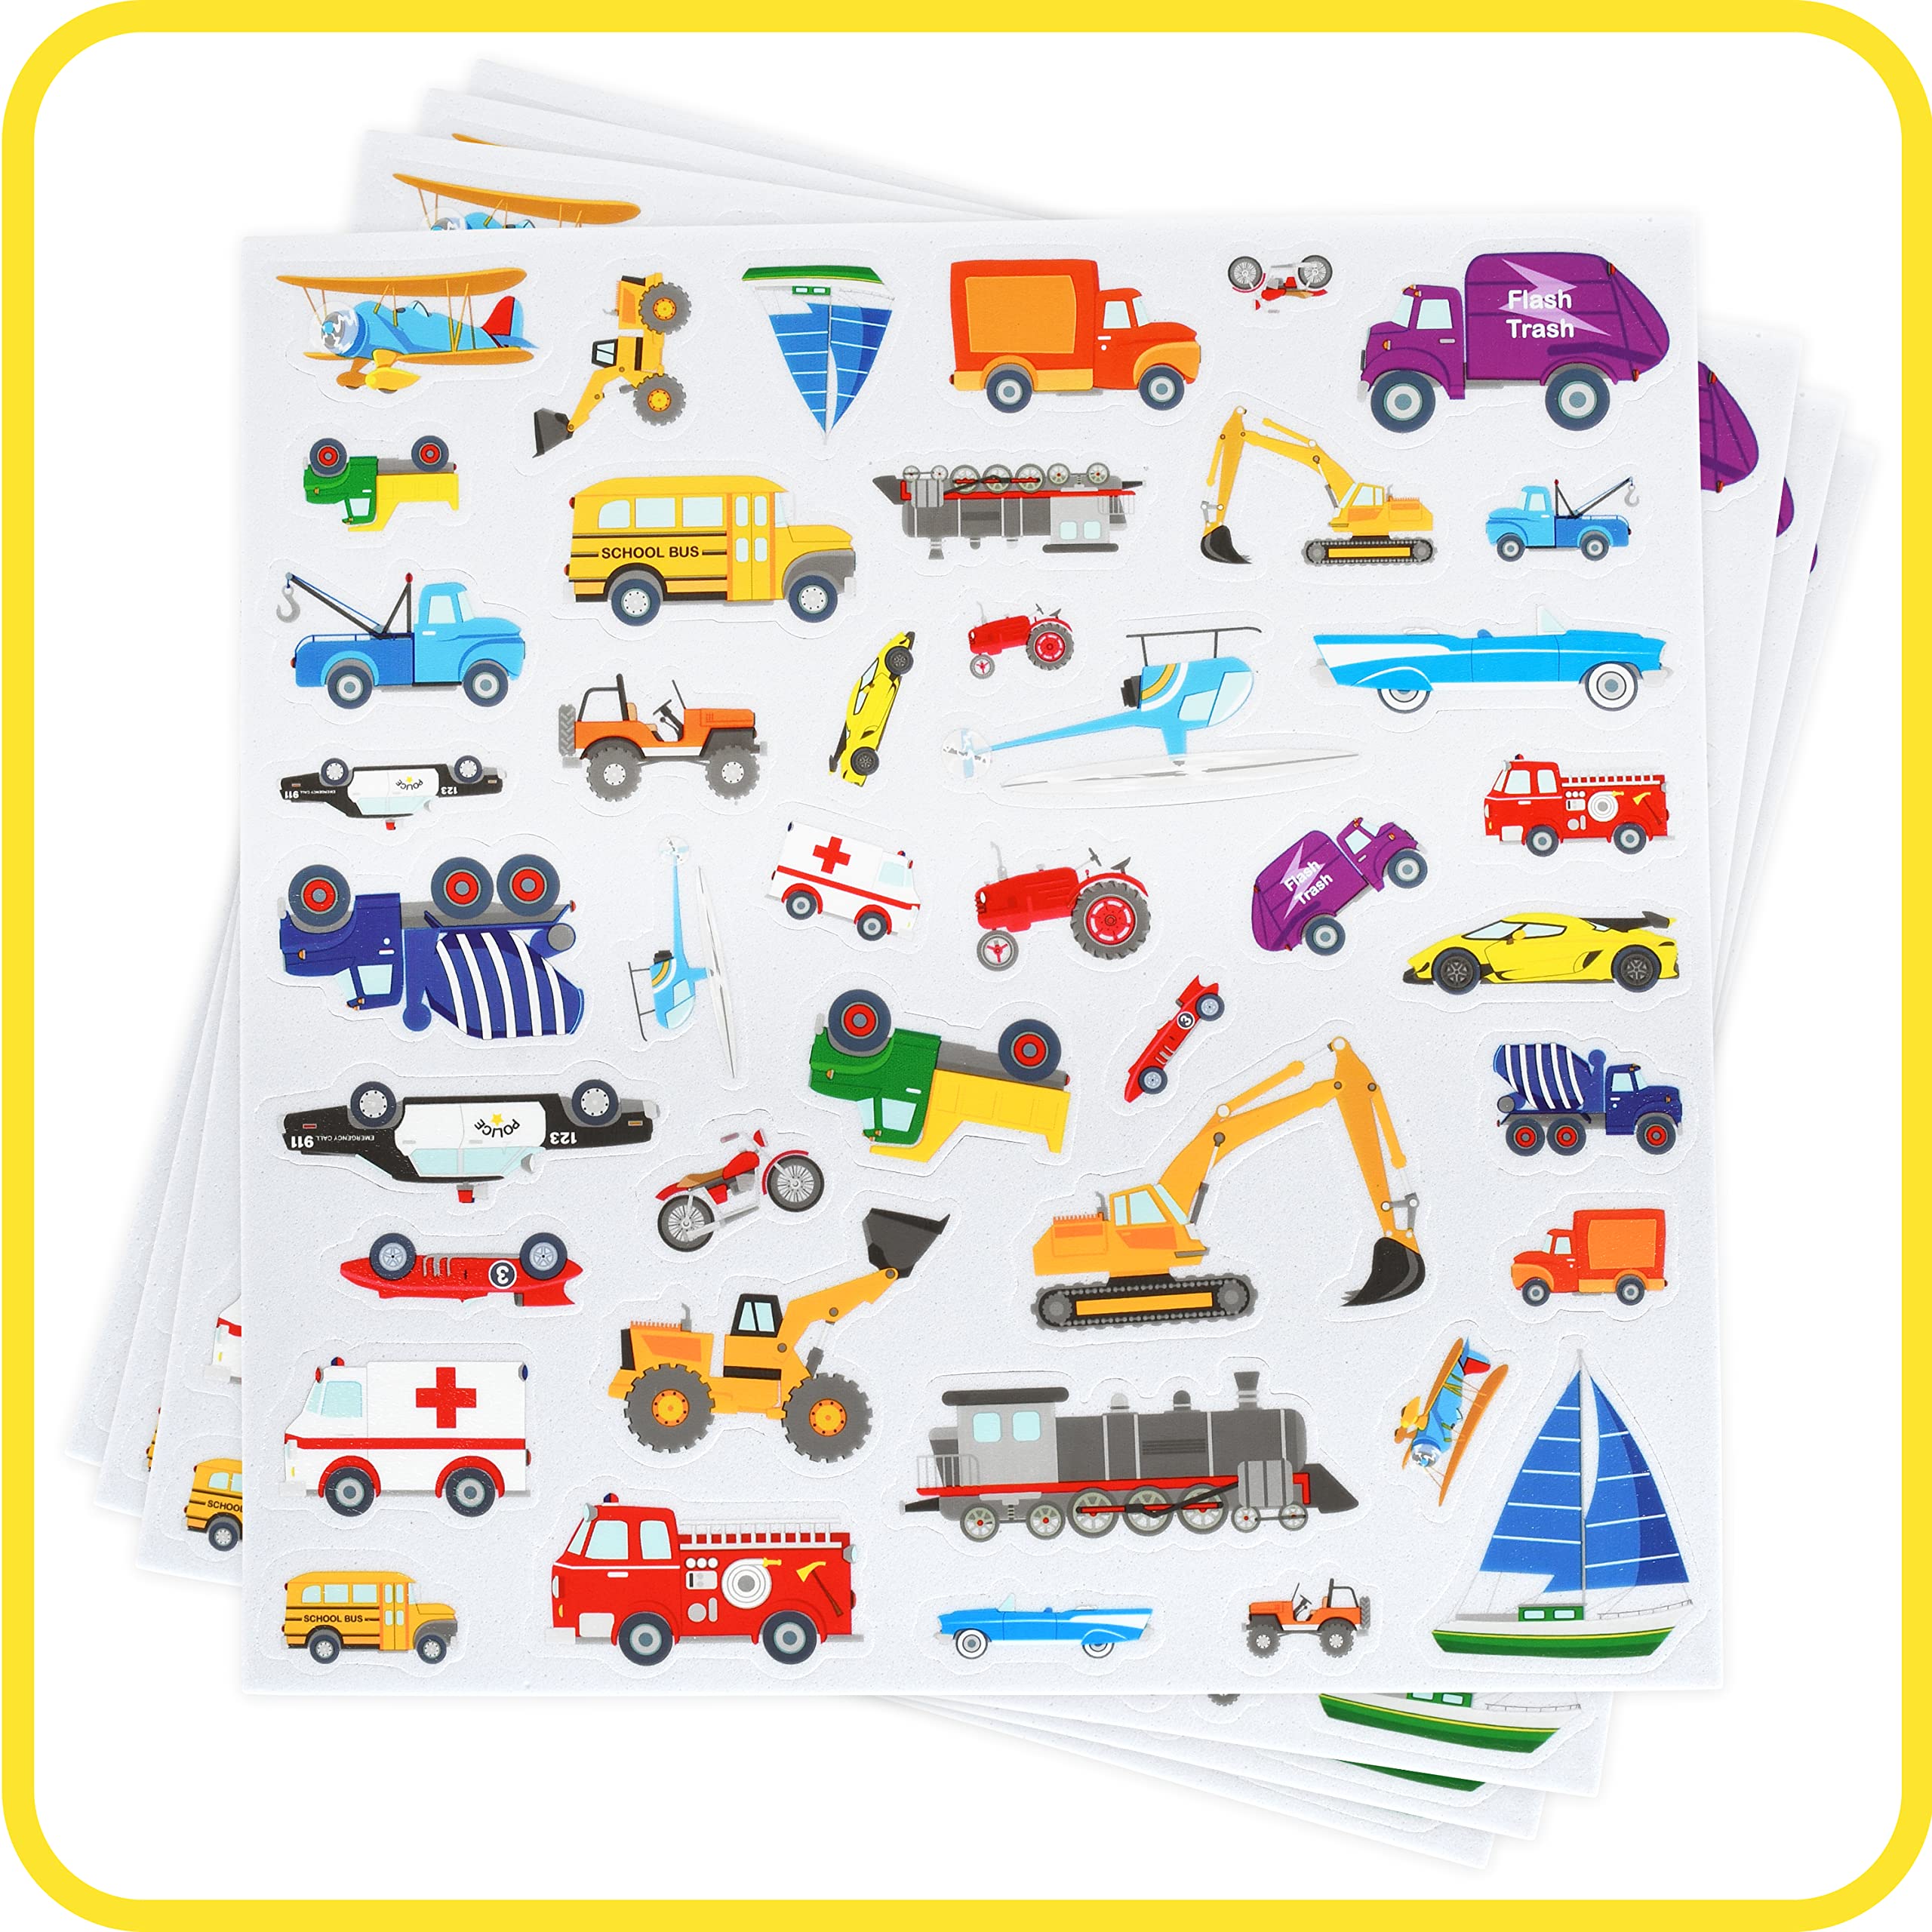 READY 2 LEARN Foam Stickers - Transport - Pack of 168 - Self-Adhesive Stickers for Kids - 3D Puffy Transport Stickers for Laptops, Party Favors and Crafts